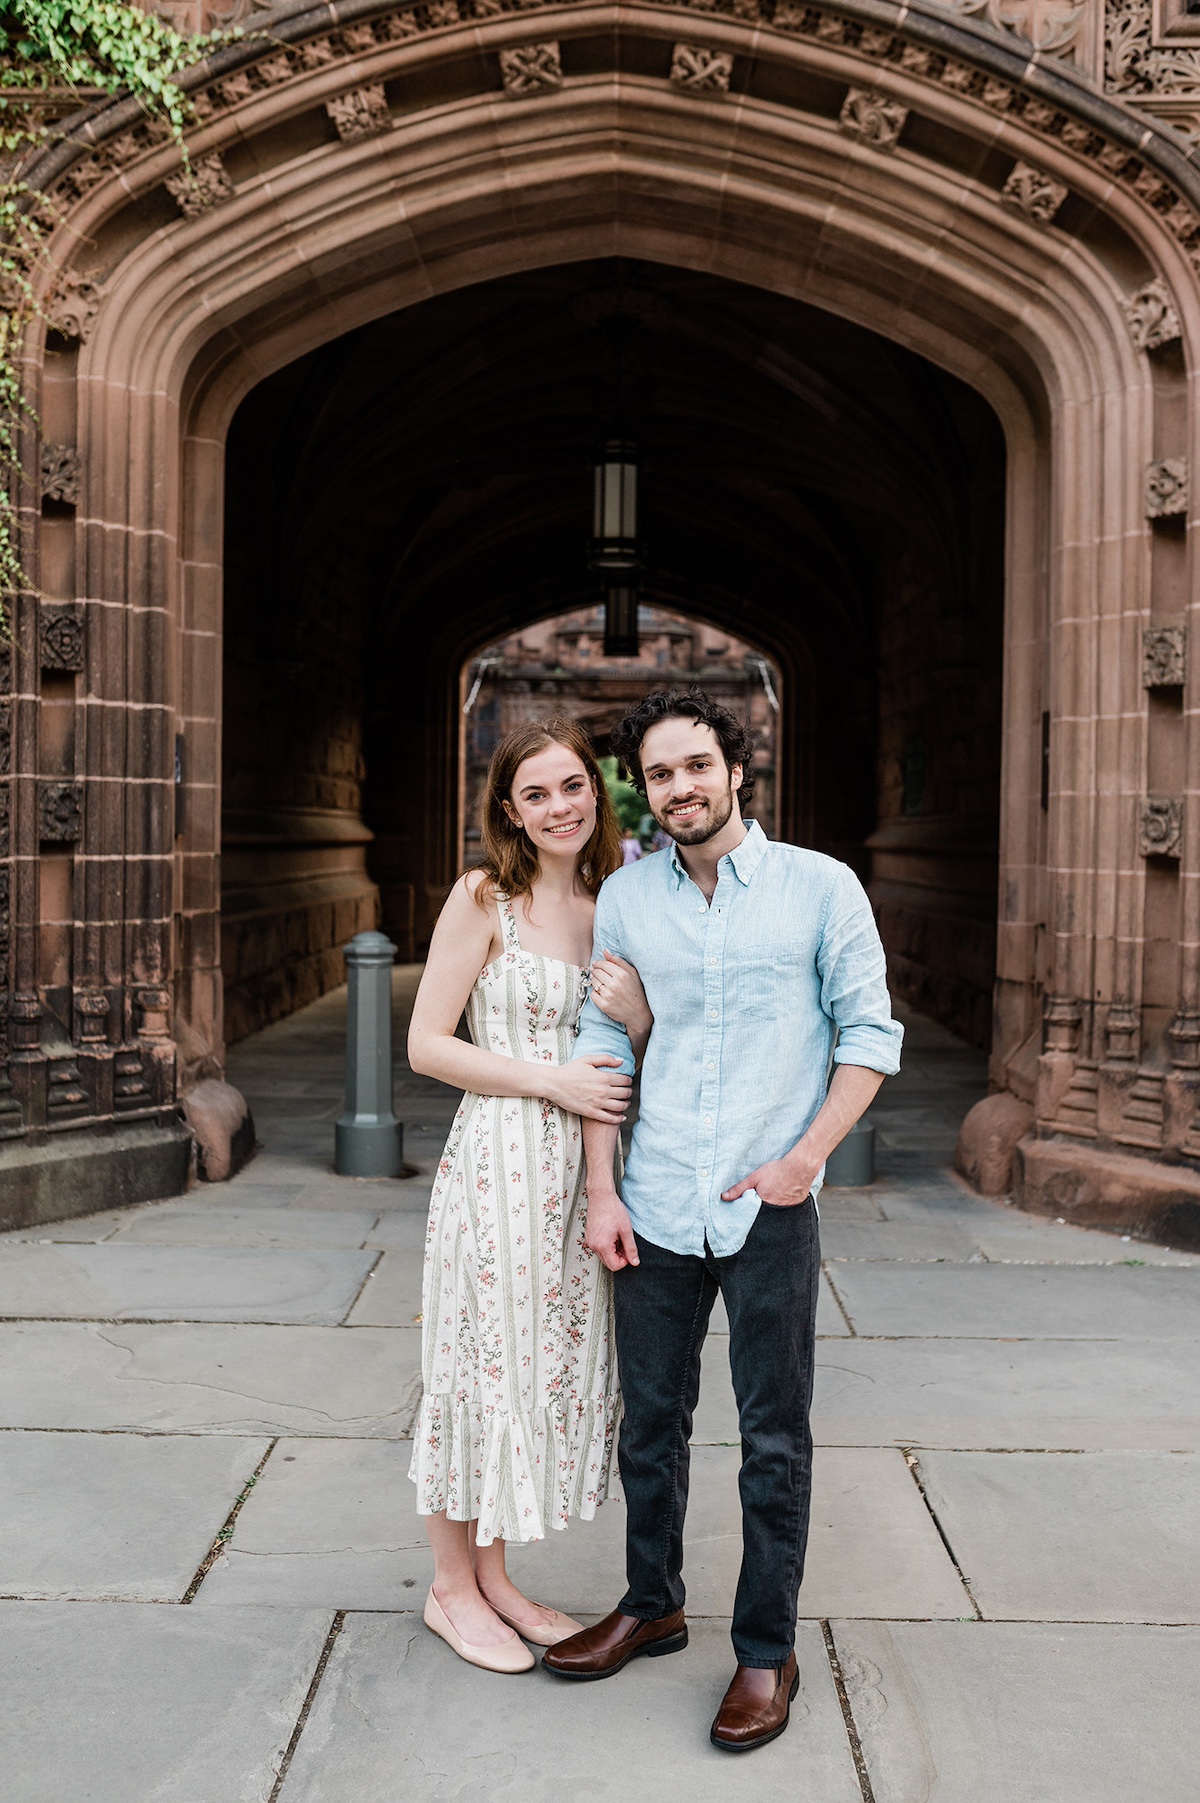 Princeton University's iconic architecture provides a captivating stage for Page and Christopher's love to shine.